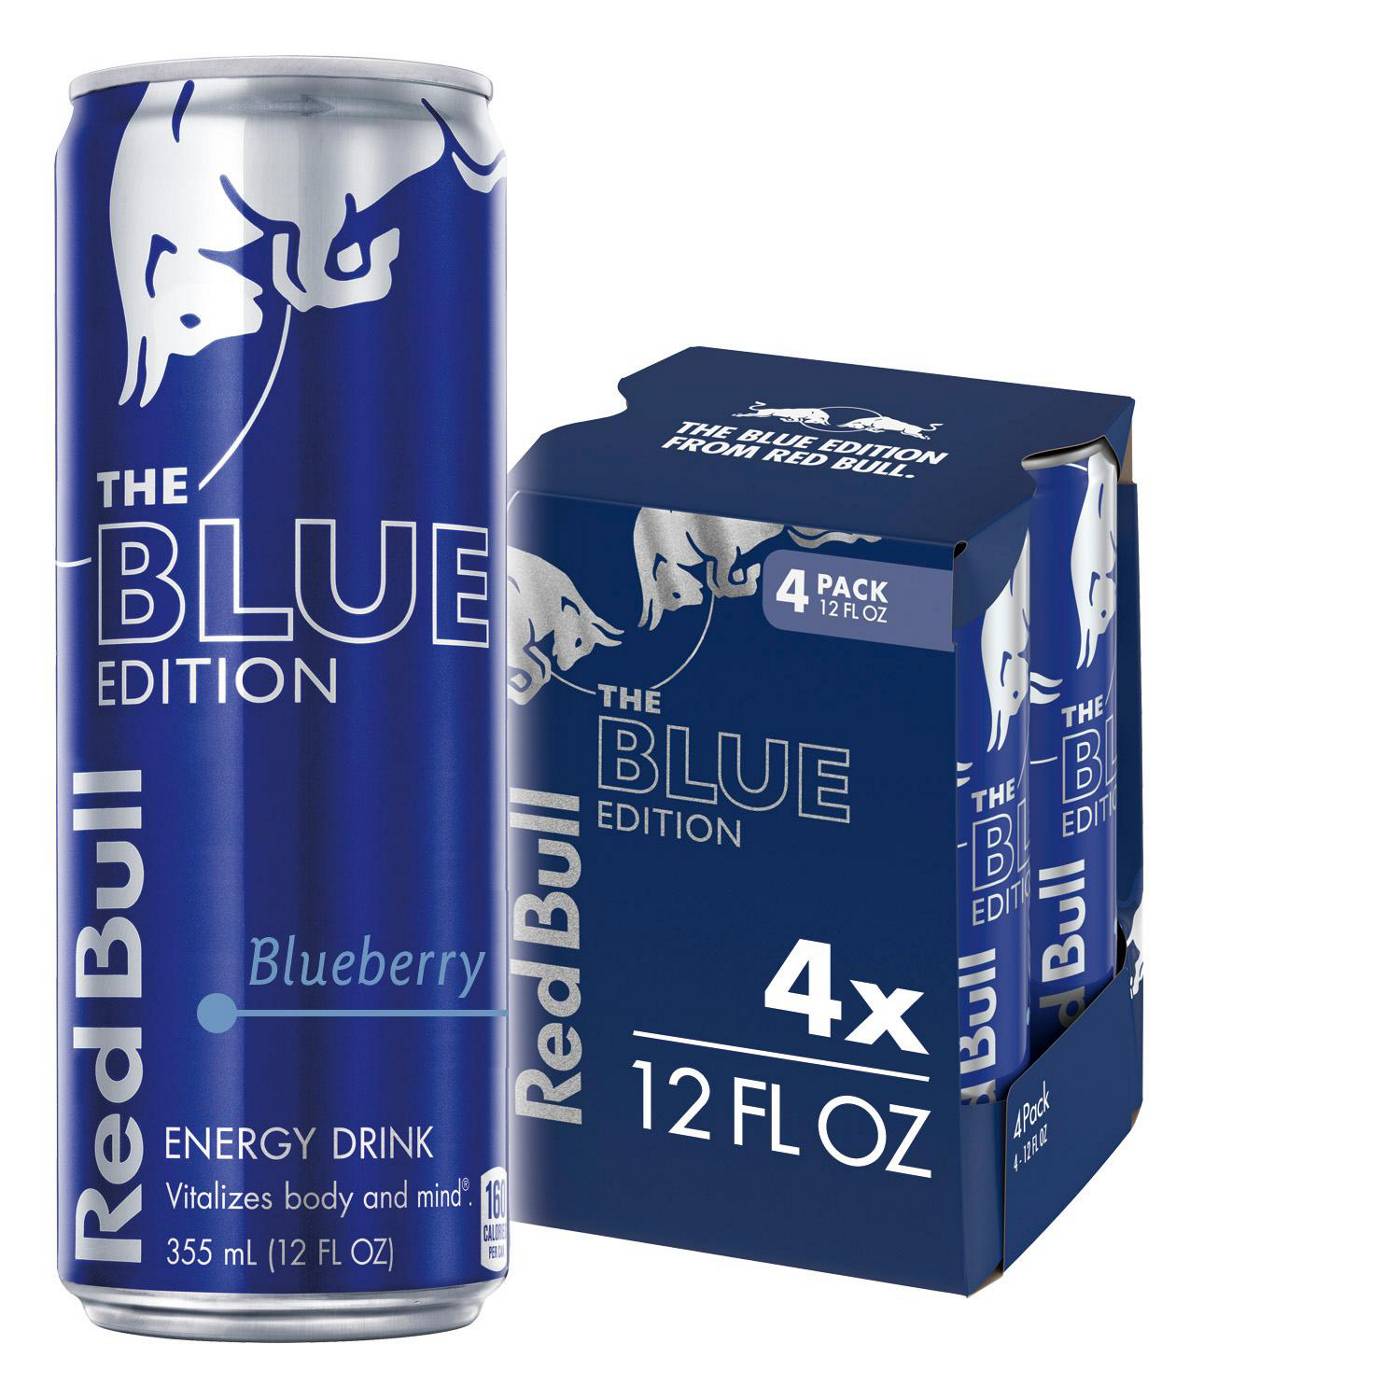 Red Bull The Blue Edition Blueberry Energy Drink 12 oz Cans; image 4 of 5